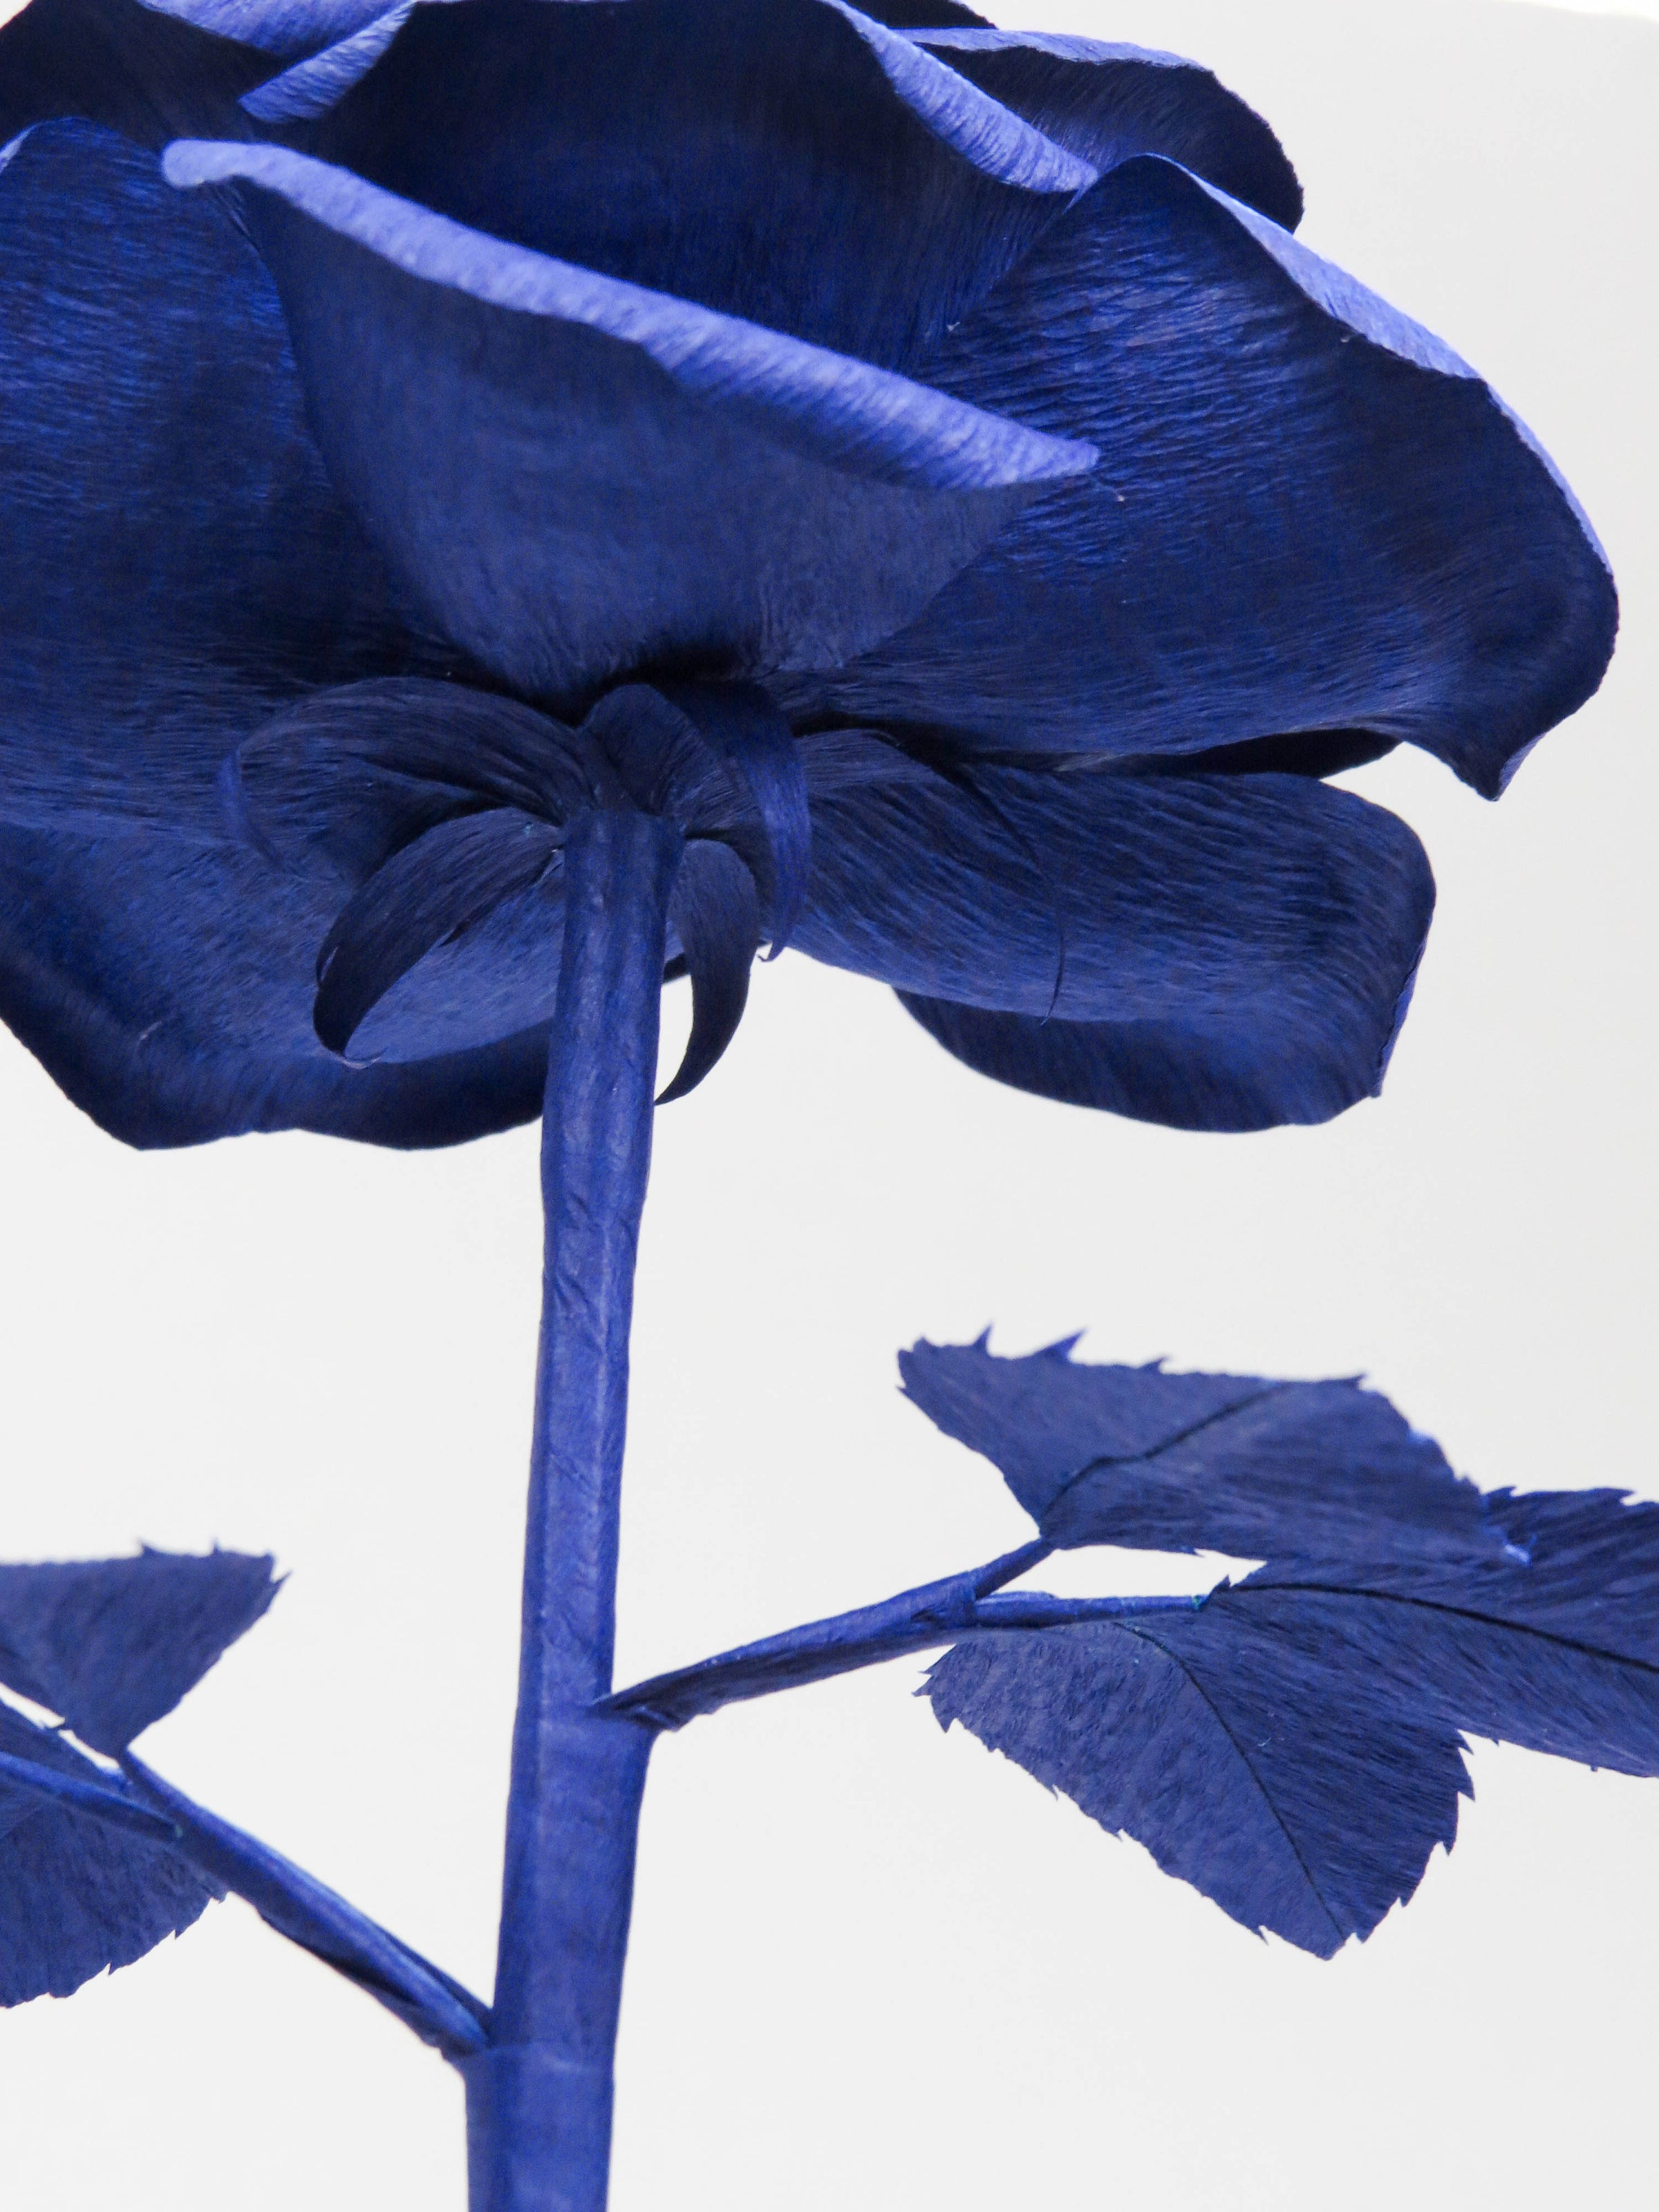 The underneath of the sapphire blue crepe paper rose showing the sapphire blue calyx with the sapphire blue stem and the back of the sapphire blue crepe paper leaves